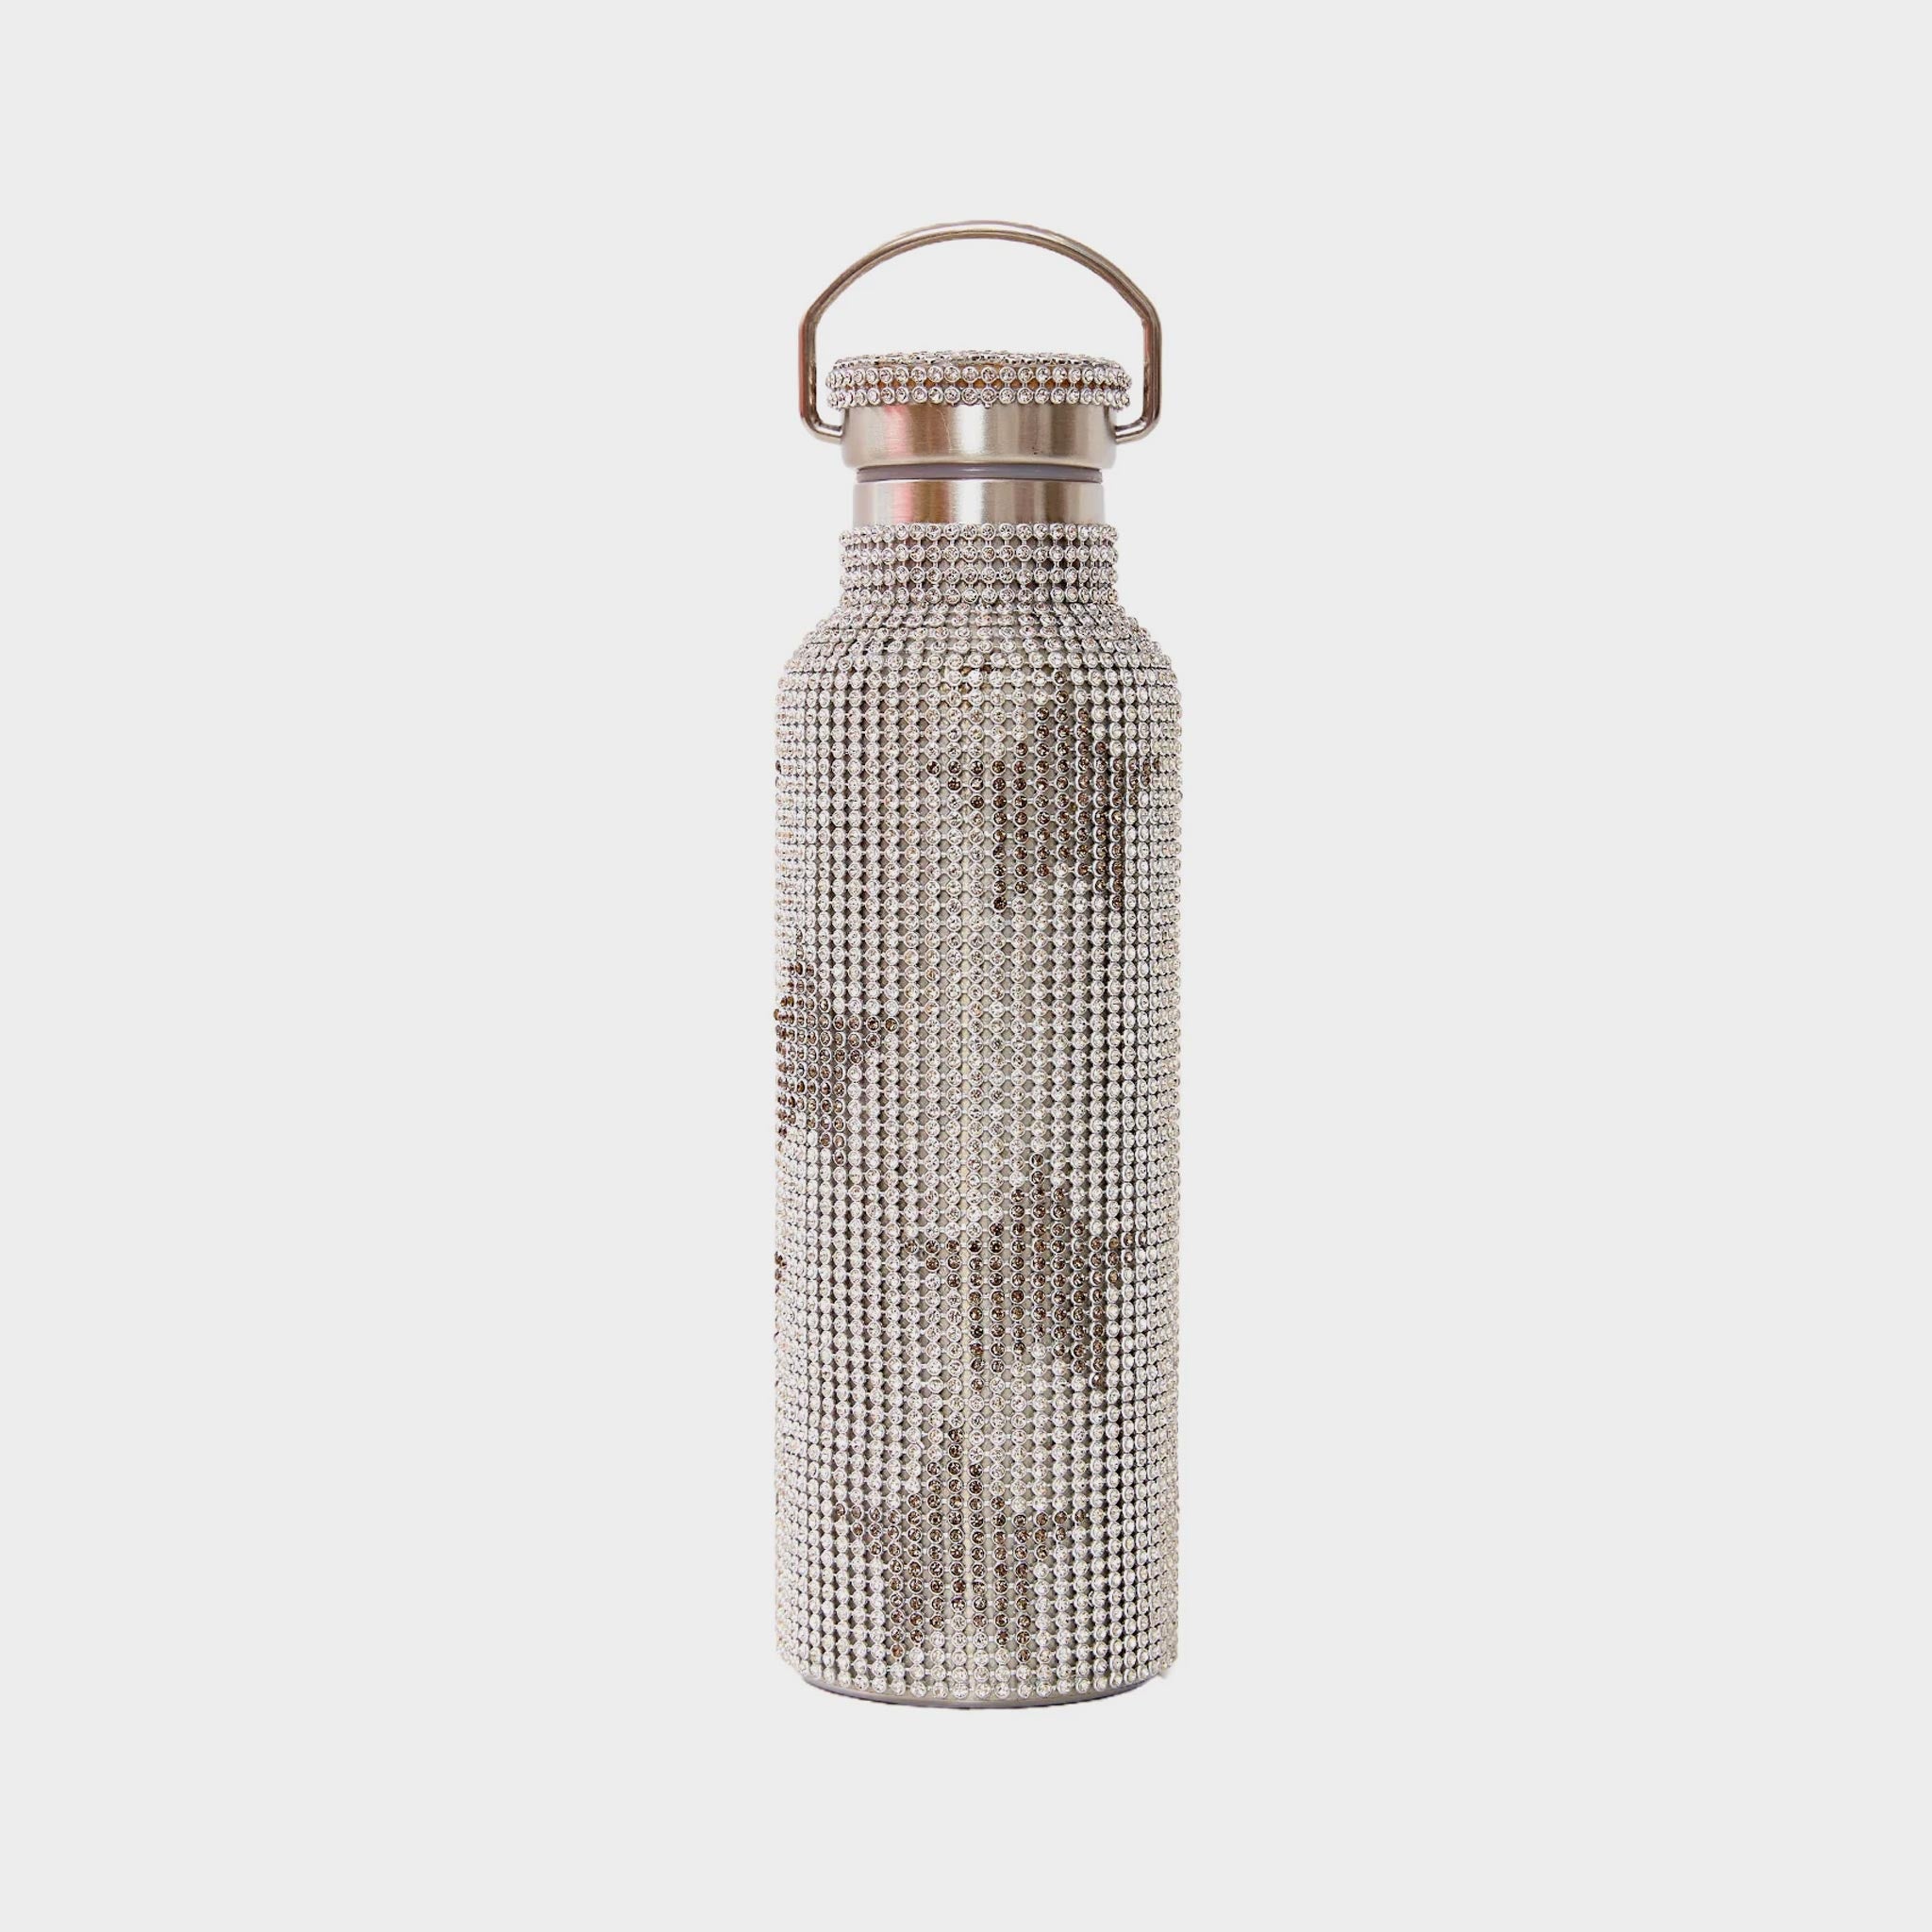 Stainless steel water bottle covered in rhinestones laid out in a pattern to show black stars on white crystals.